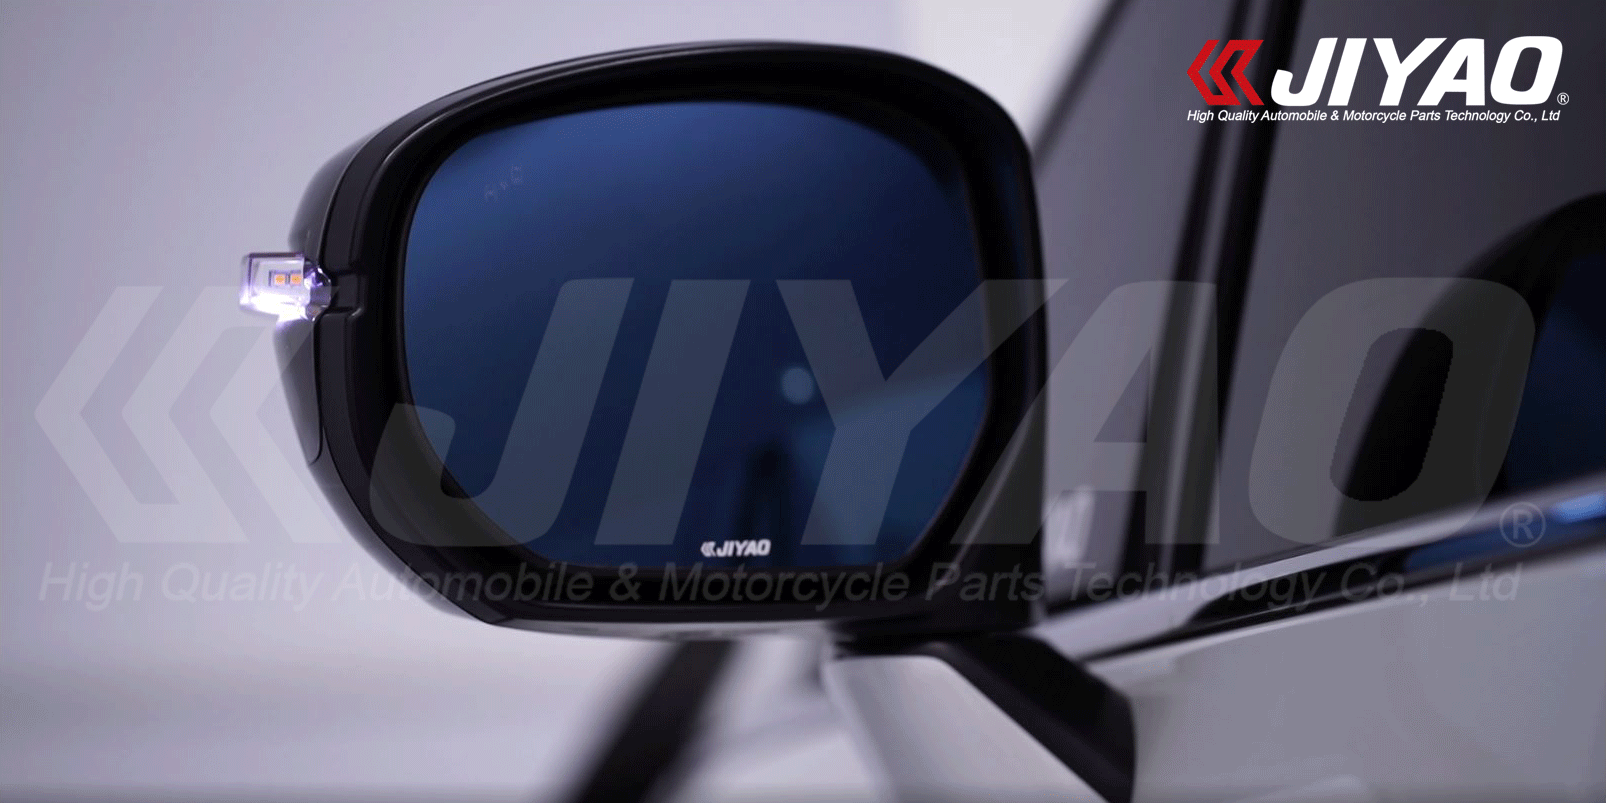 HONDA ODYSSEY Multi-function sequential wing mirror